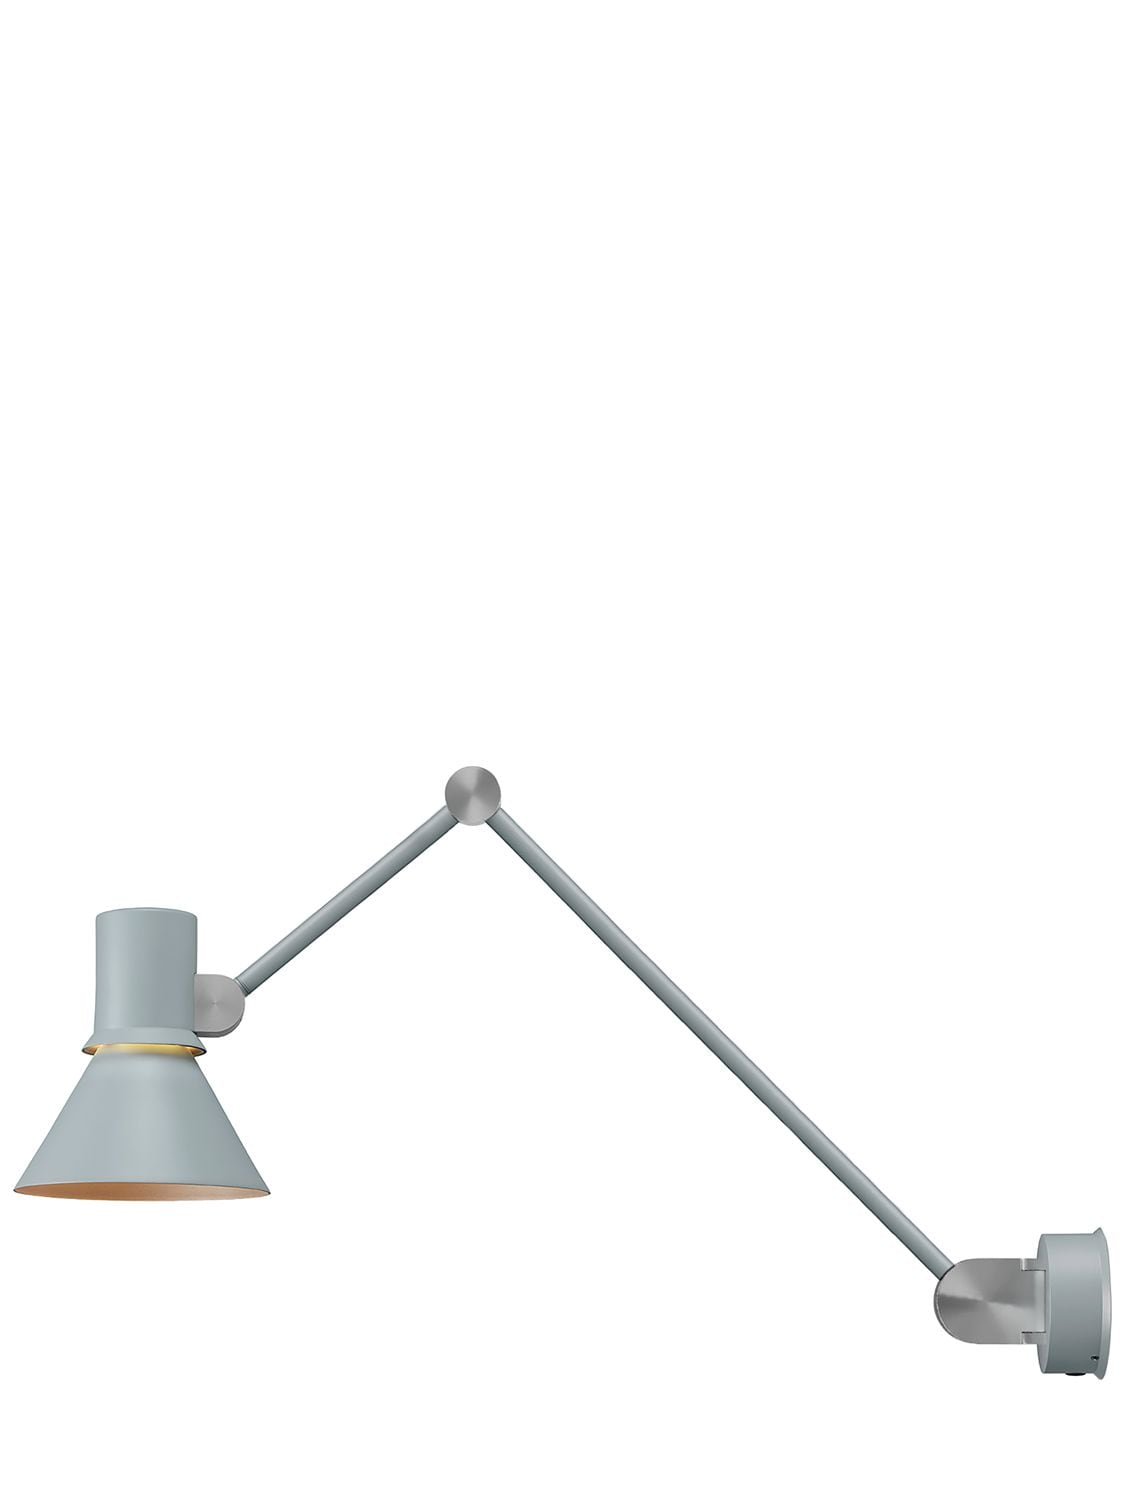 Image of Type 80 W3 Wall Light